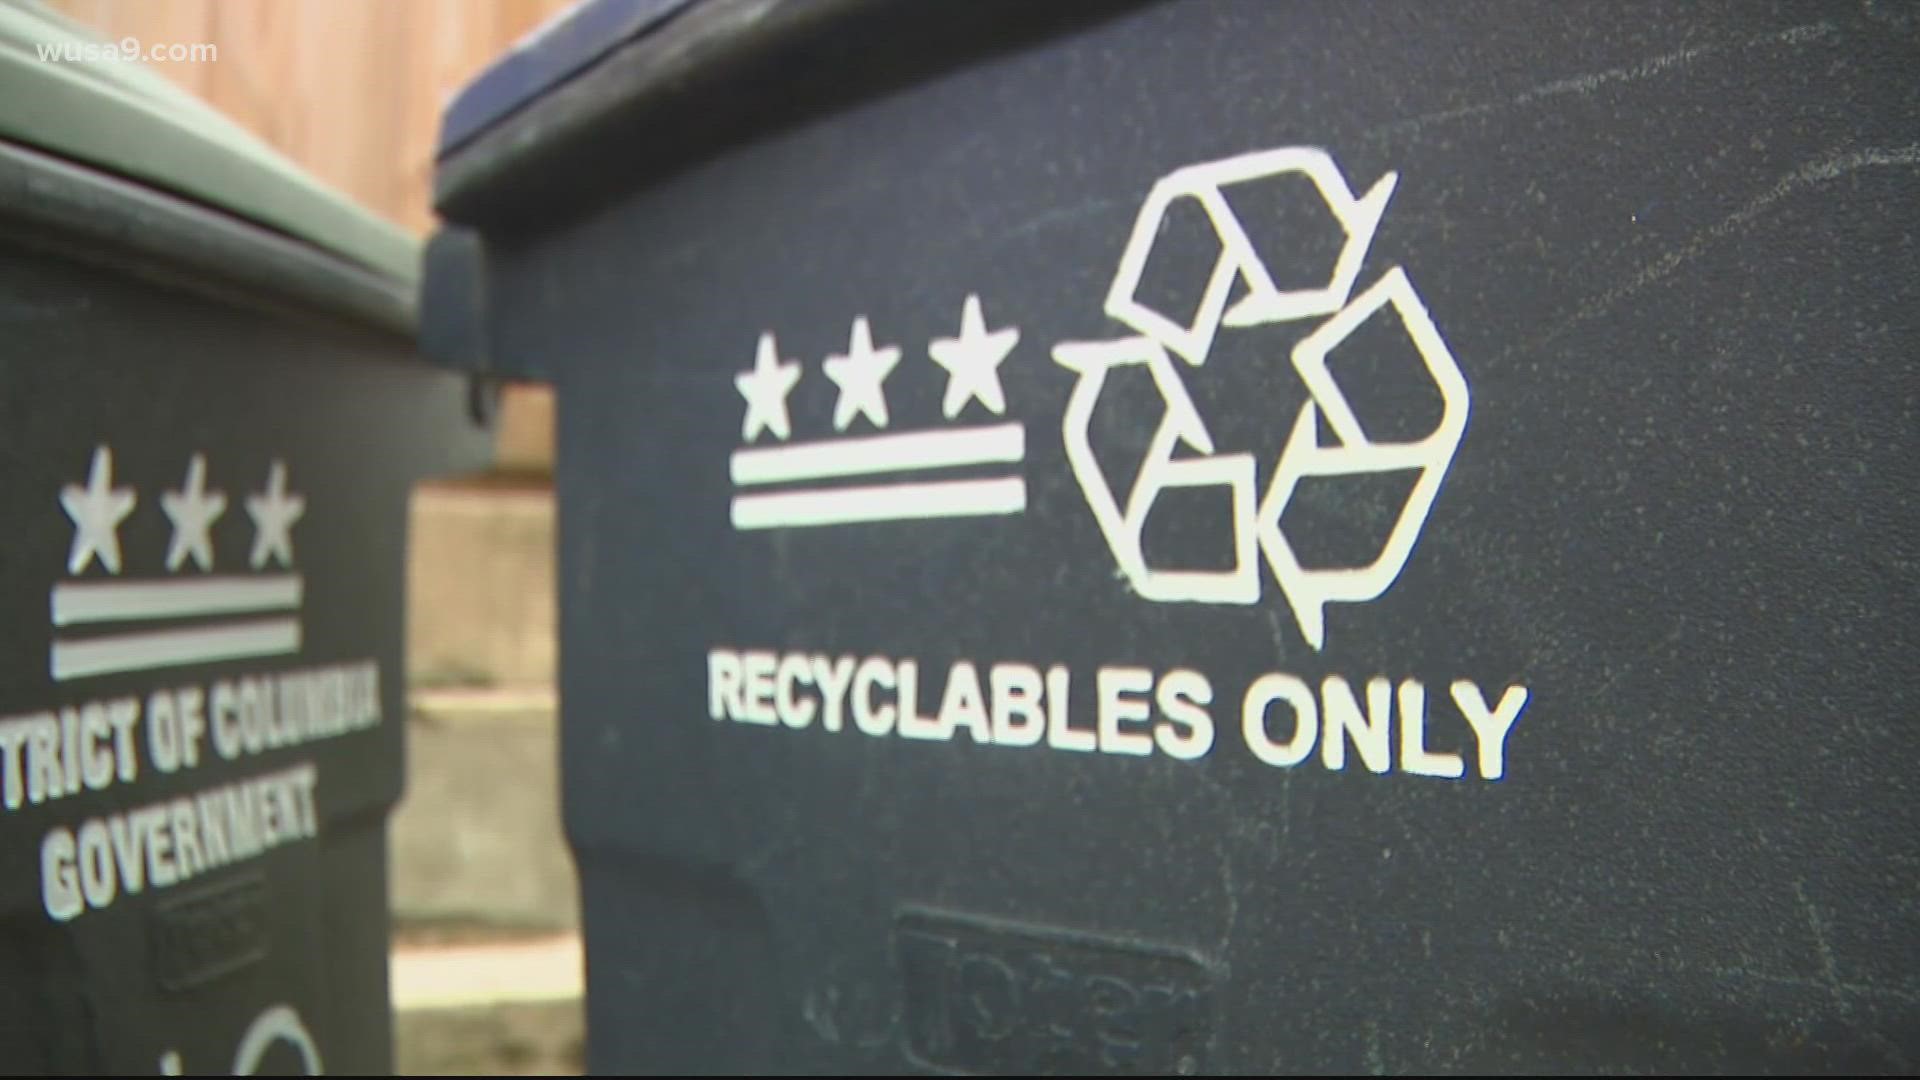 The initiative hopes to help people understand some of the misconceptions about recycling.